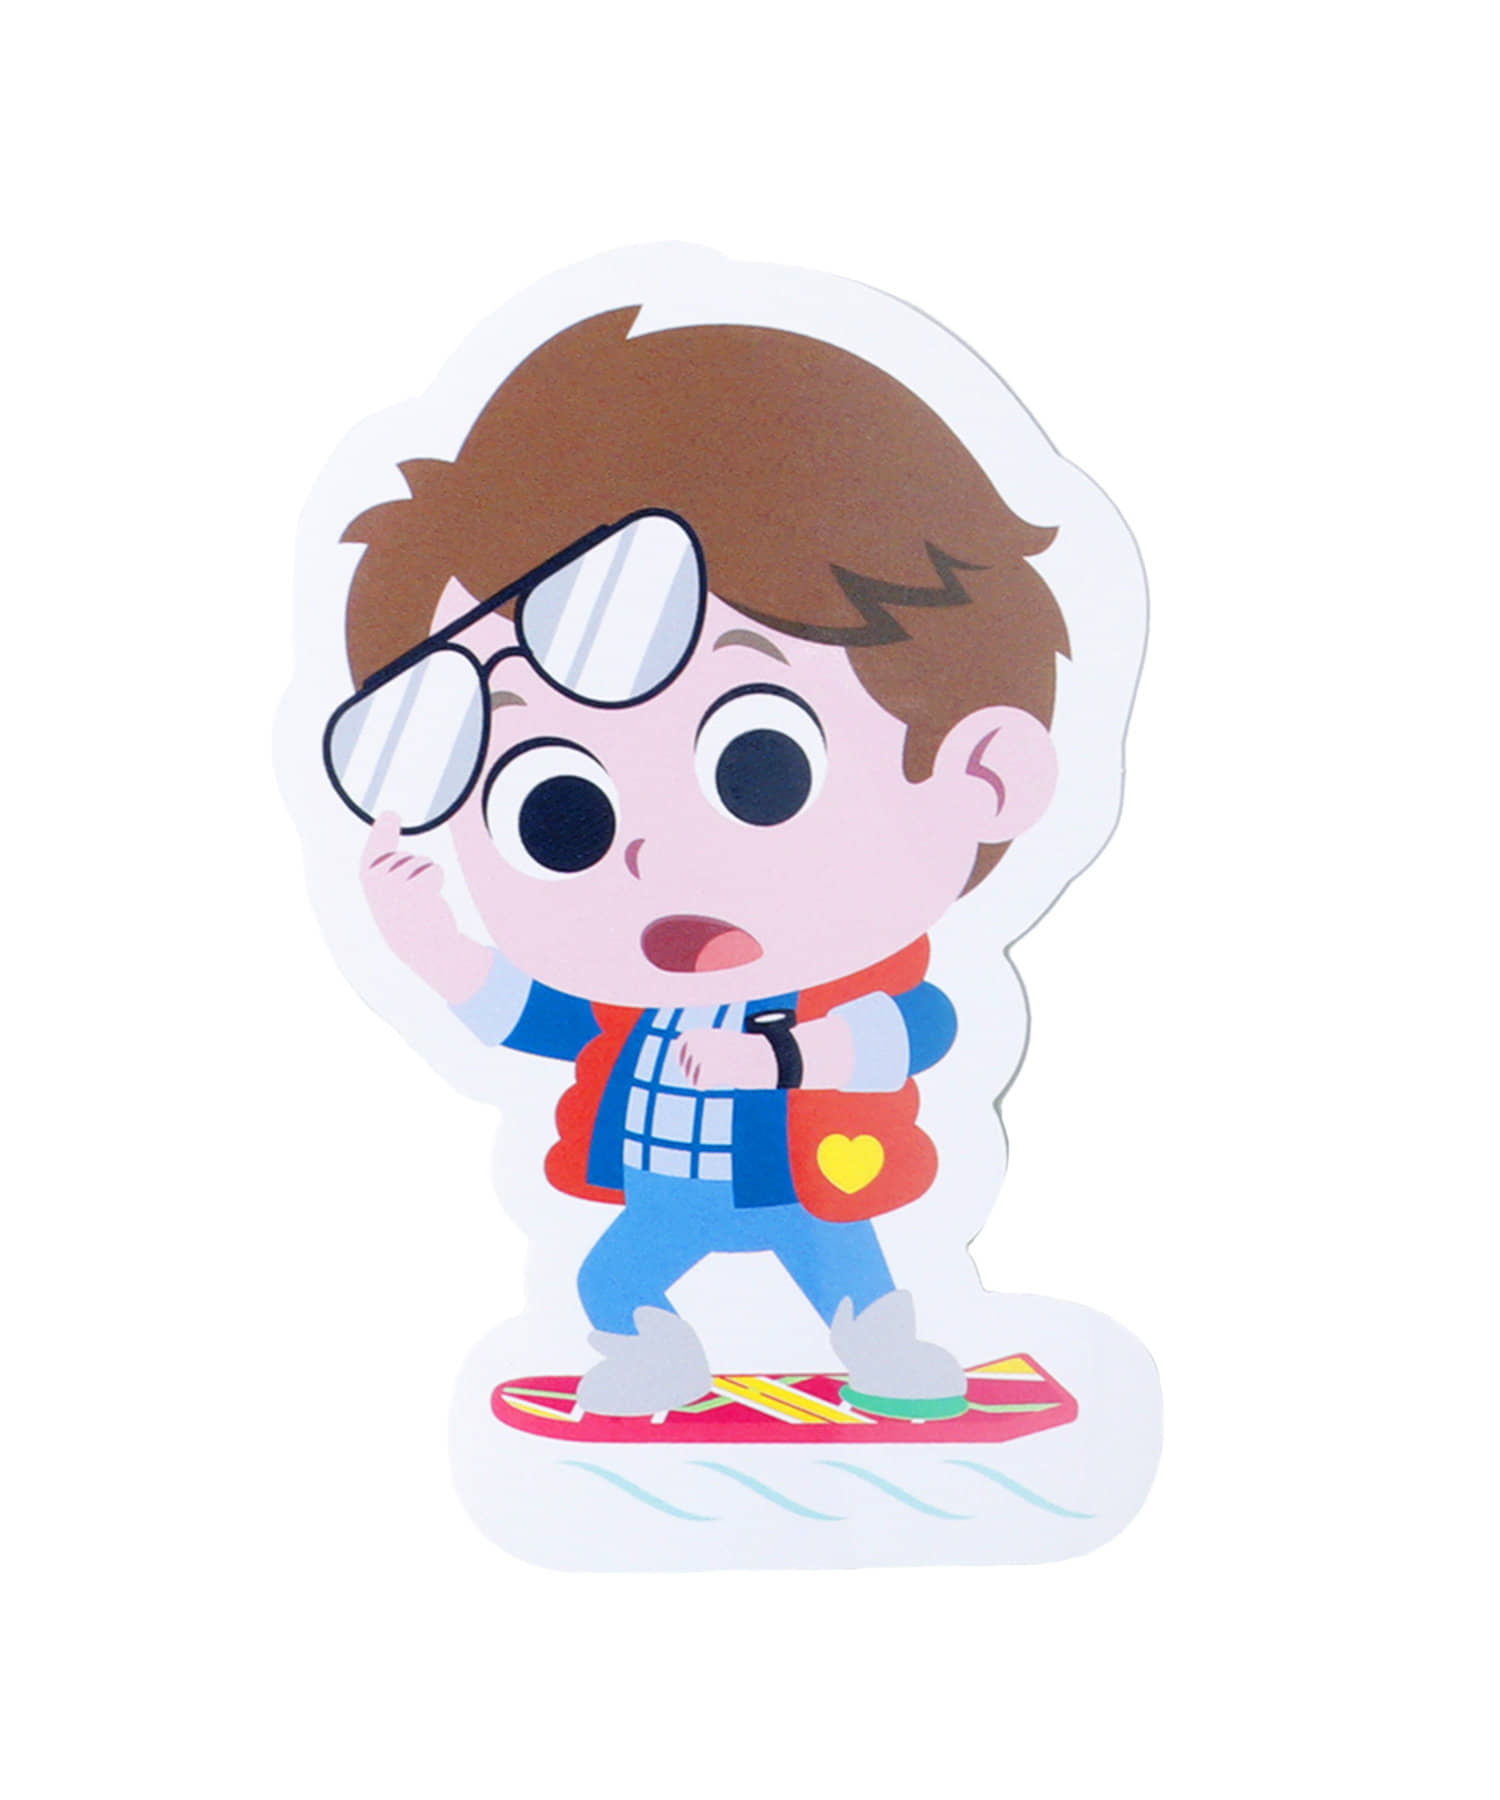 Back to the future Marty McFly - Marty Mcfly - Sticker